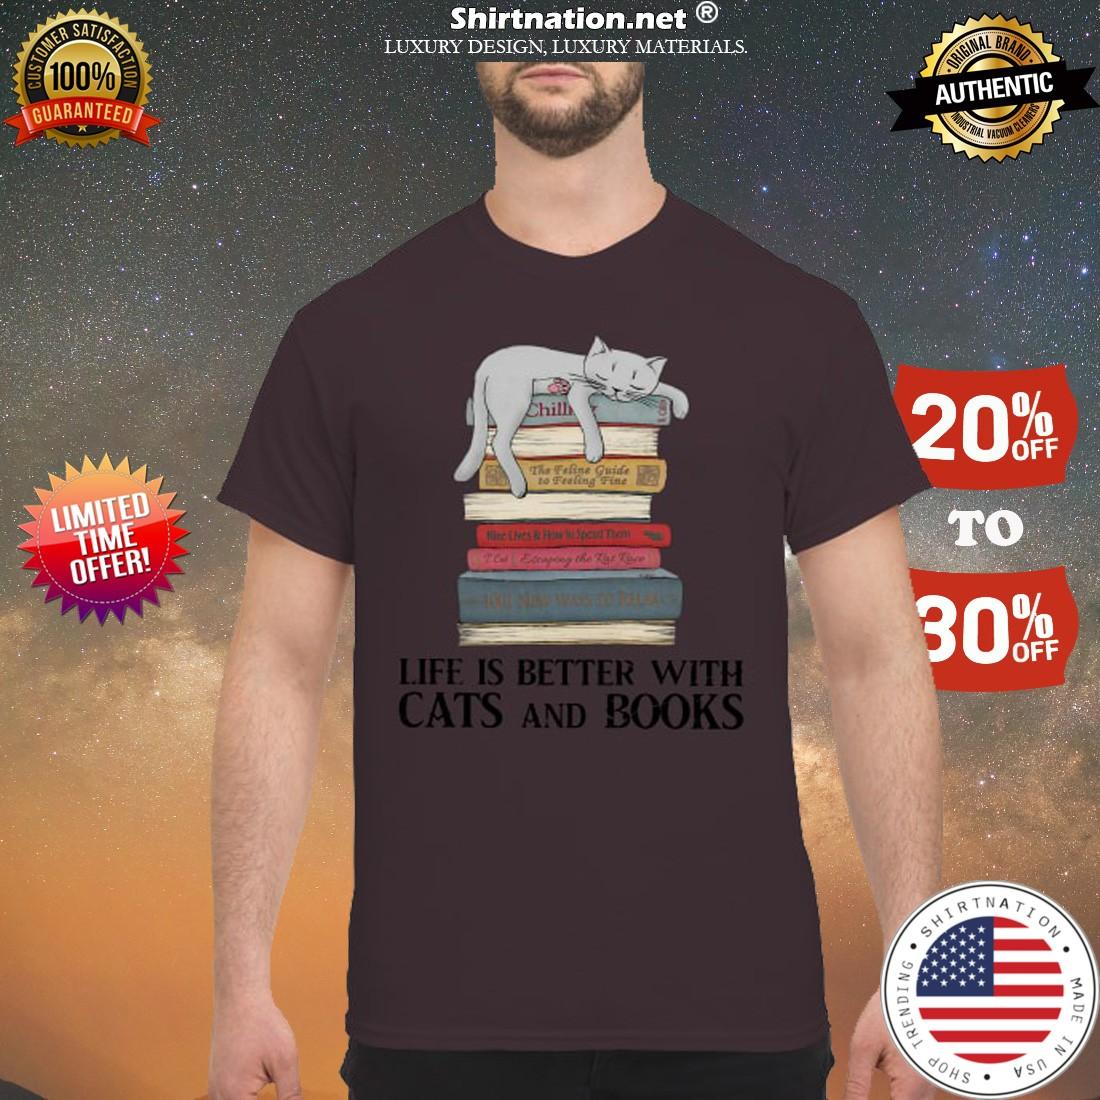 Life is better with cats and books shirt